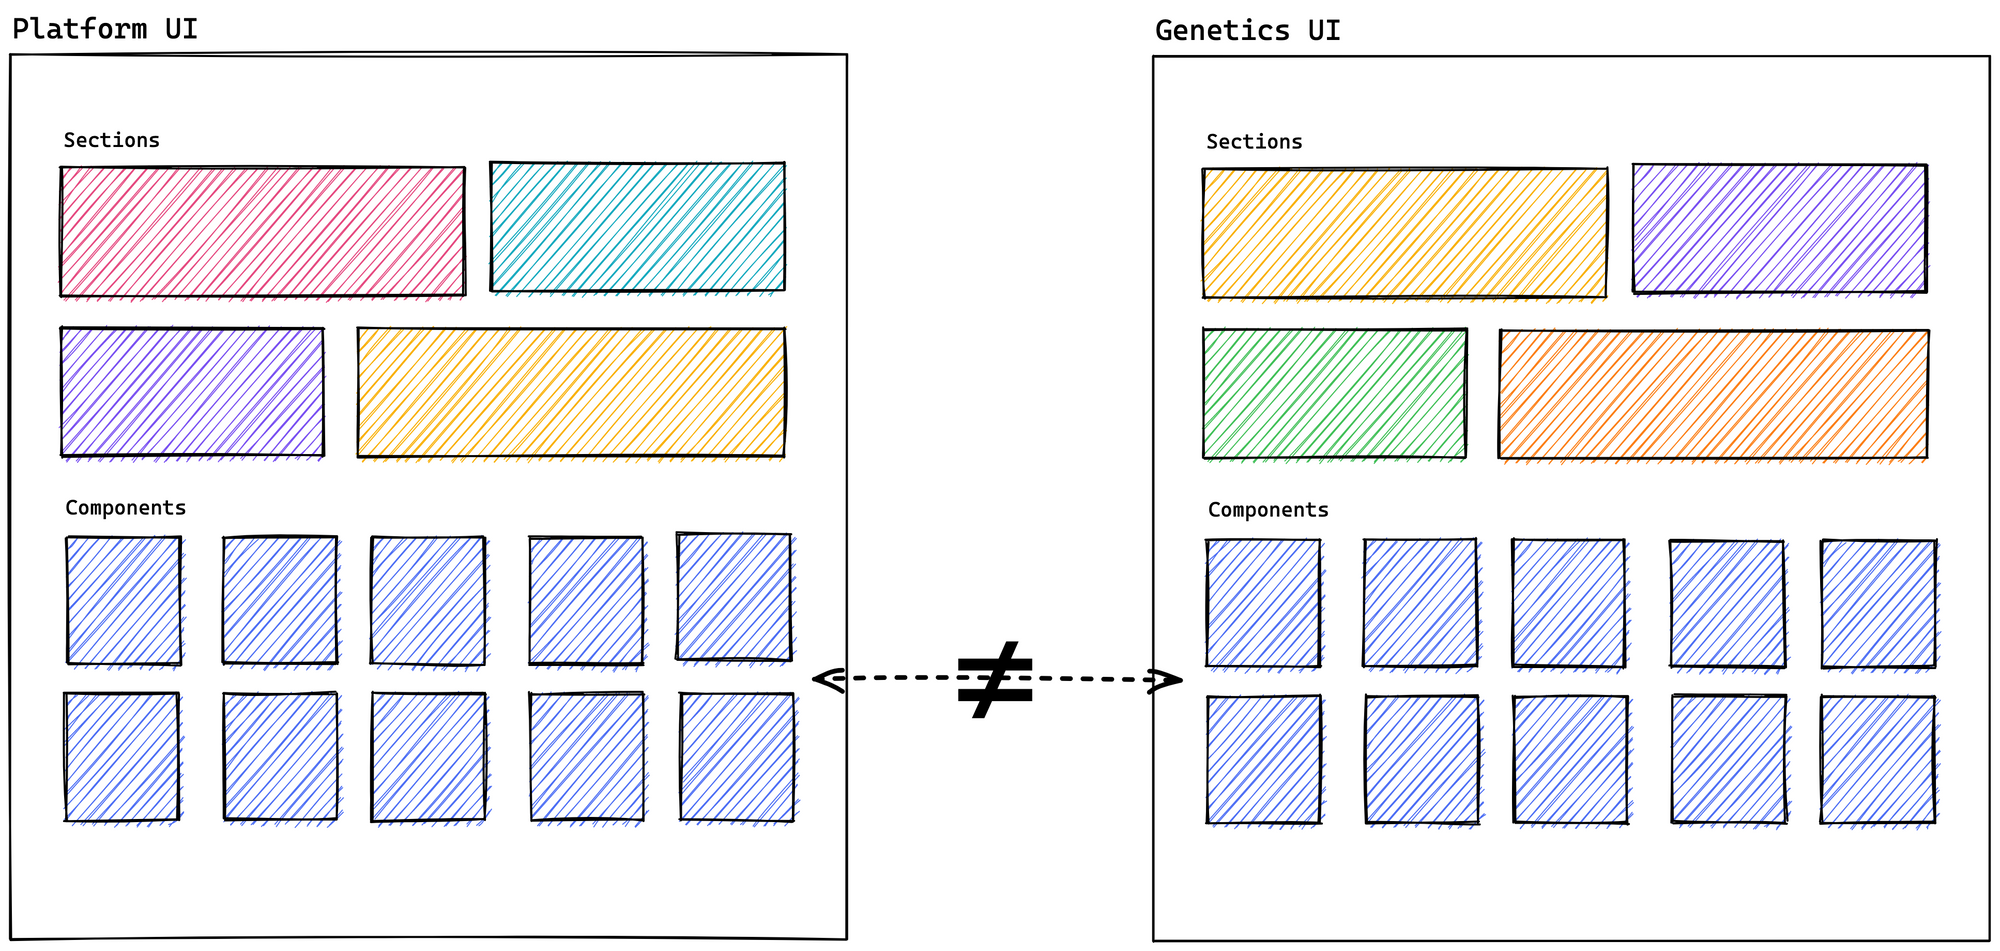 The similar components of the Platform and Genetics UIs are shown as incompatible through a "different to" sign